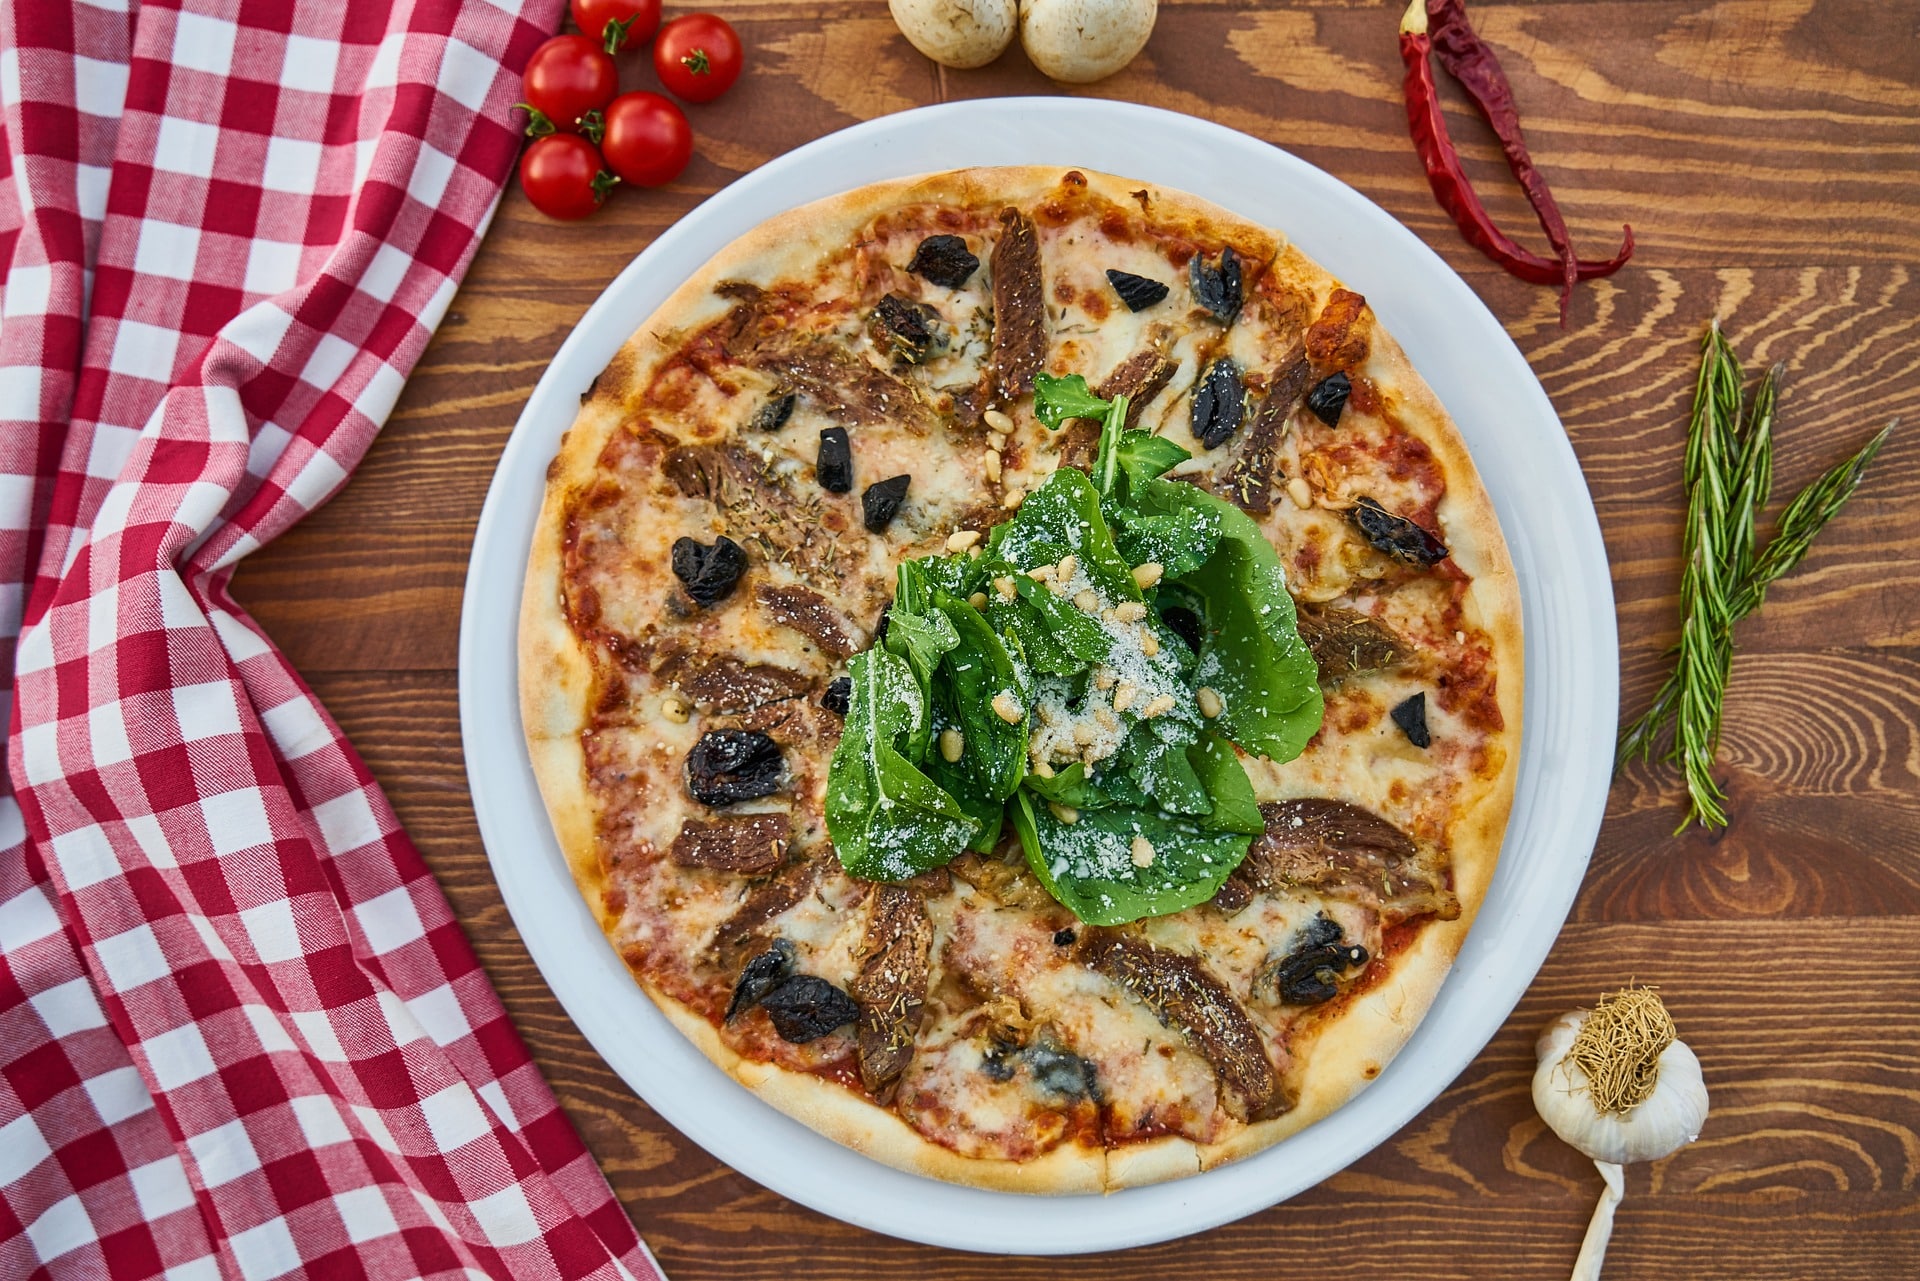 pizza-on-a-plate-on-a-wooden-table-surrounded-by tomatoes-mushrooms-herbs-and-garlic